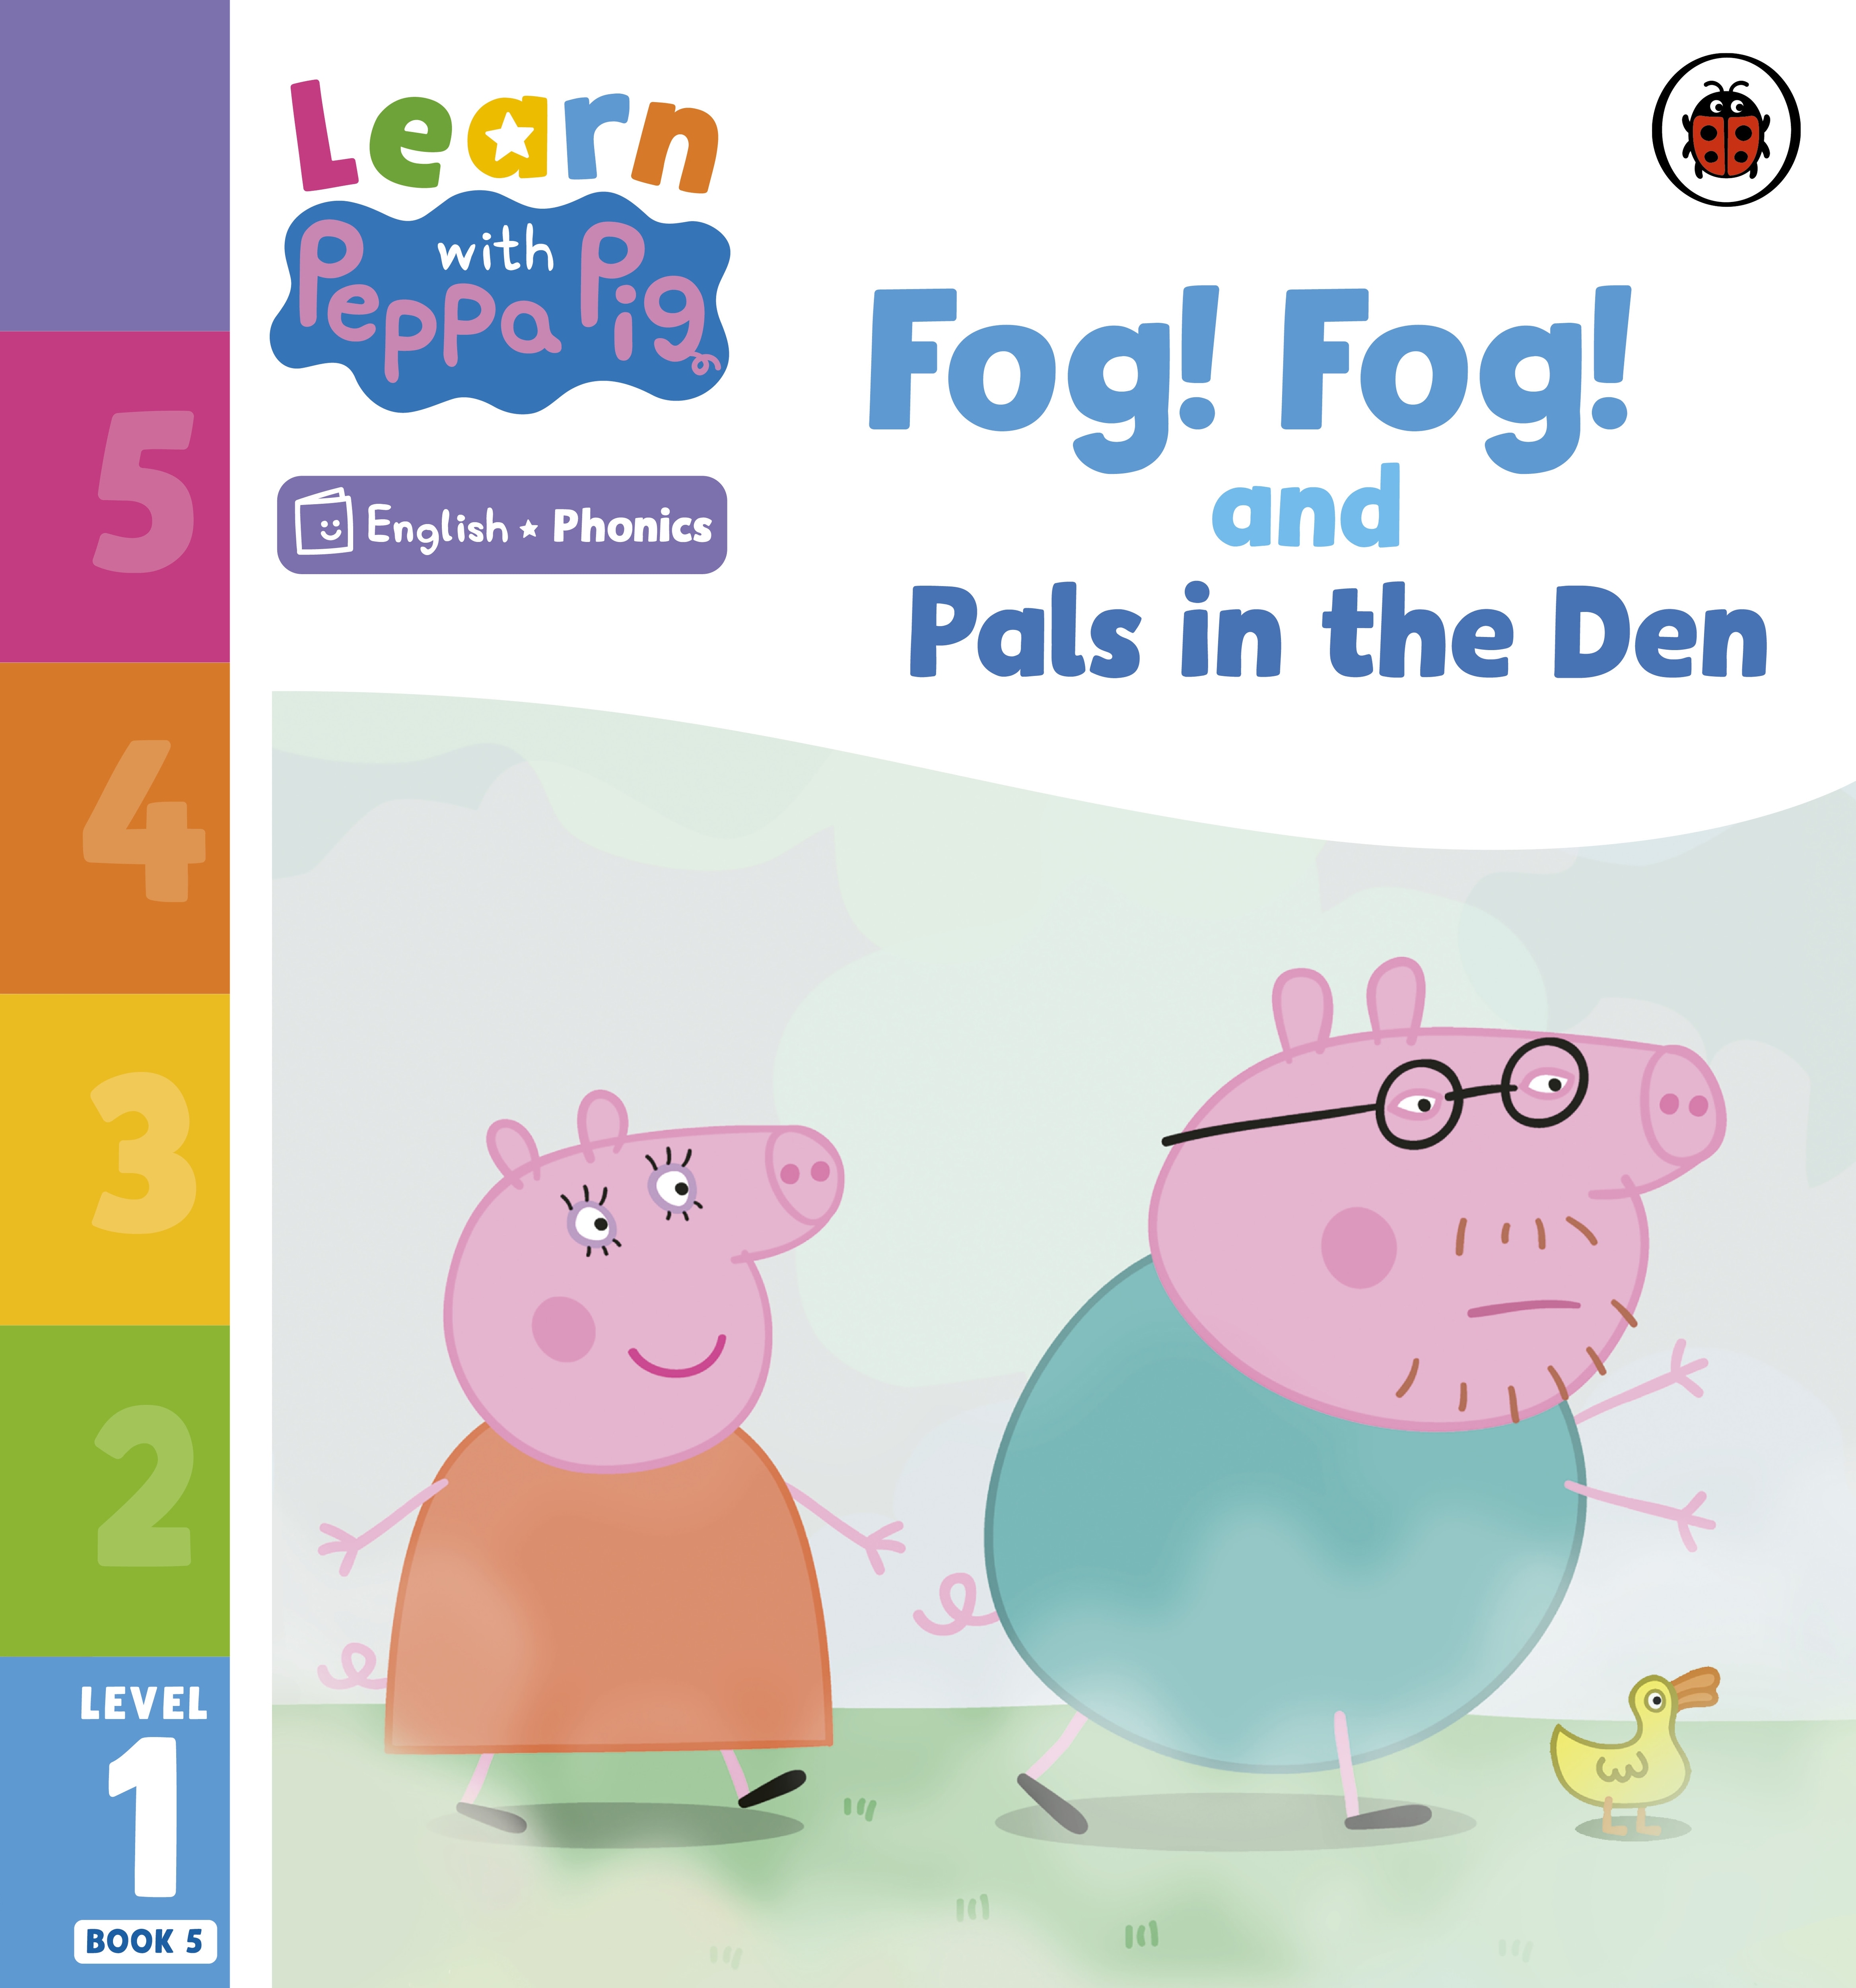 Learn with Peppa Phonics Level 1 Book 5 — Fog! Fog! and In the Den (Phonics Reader)